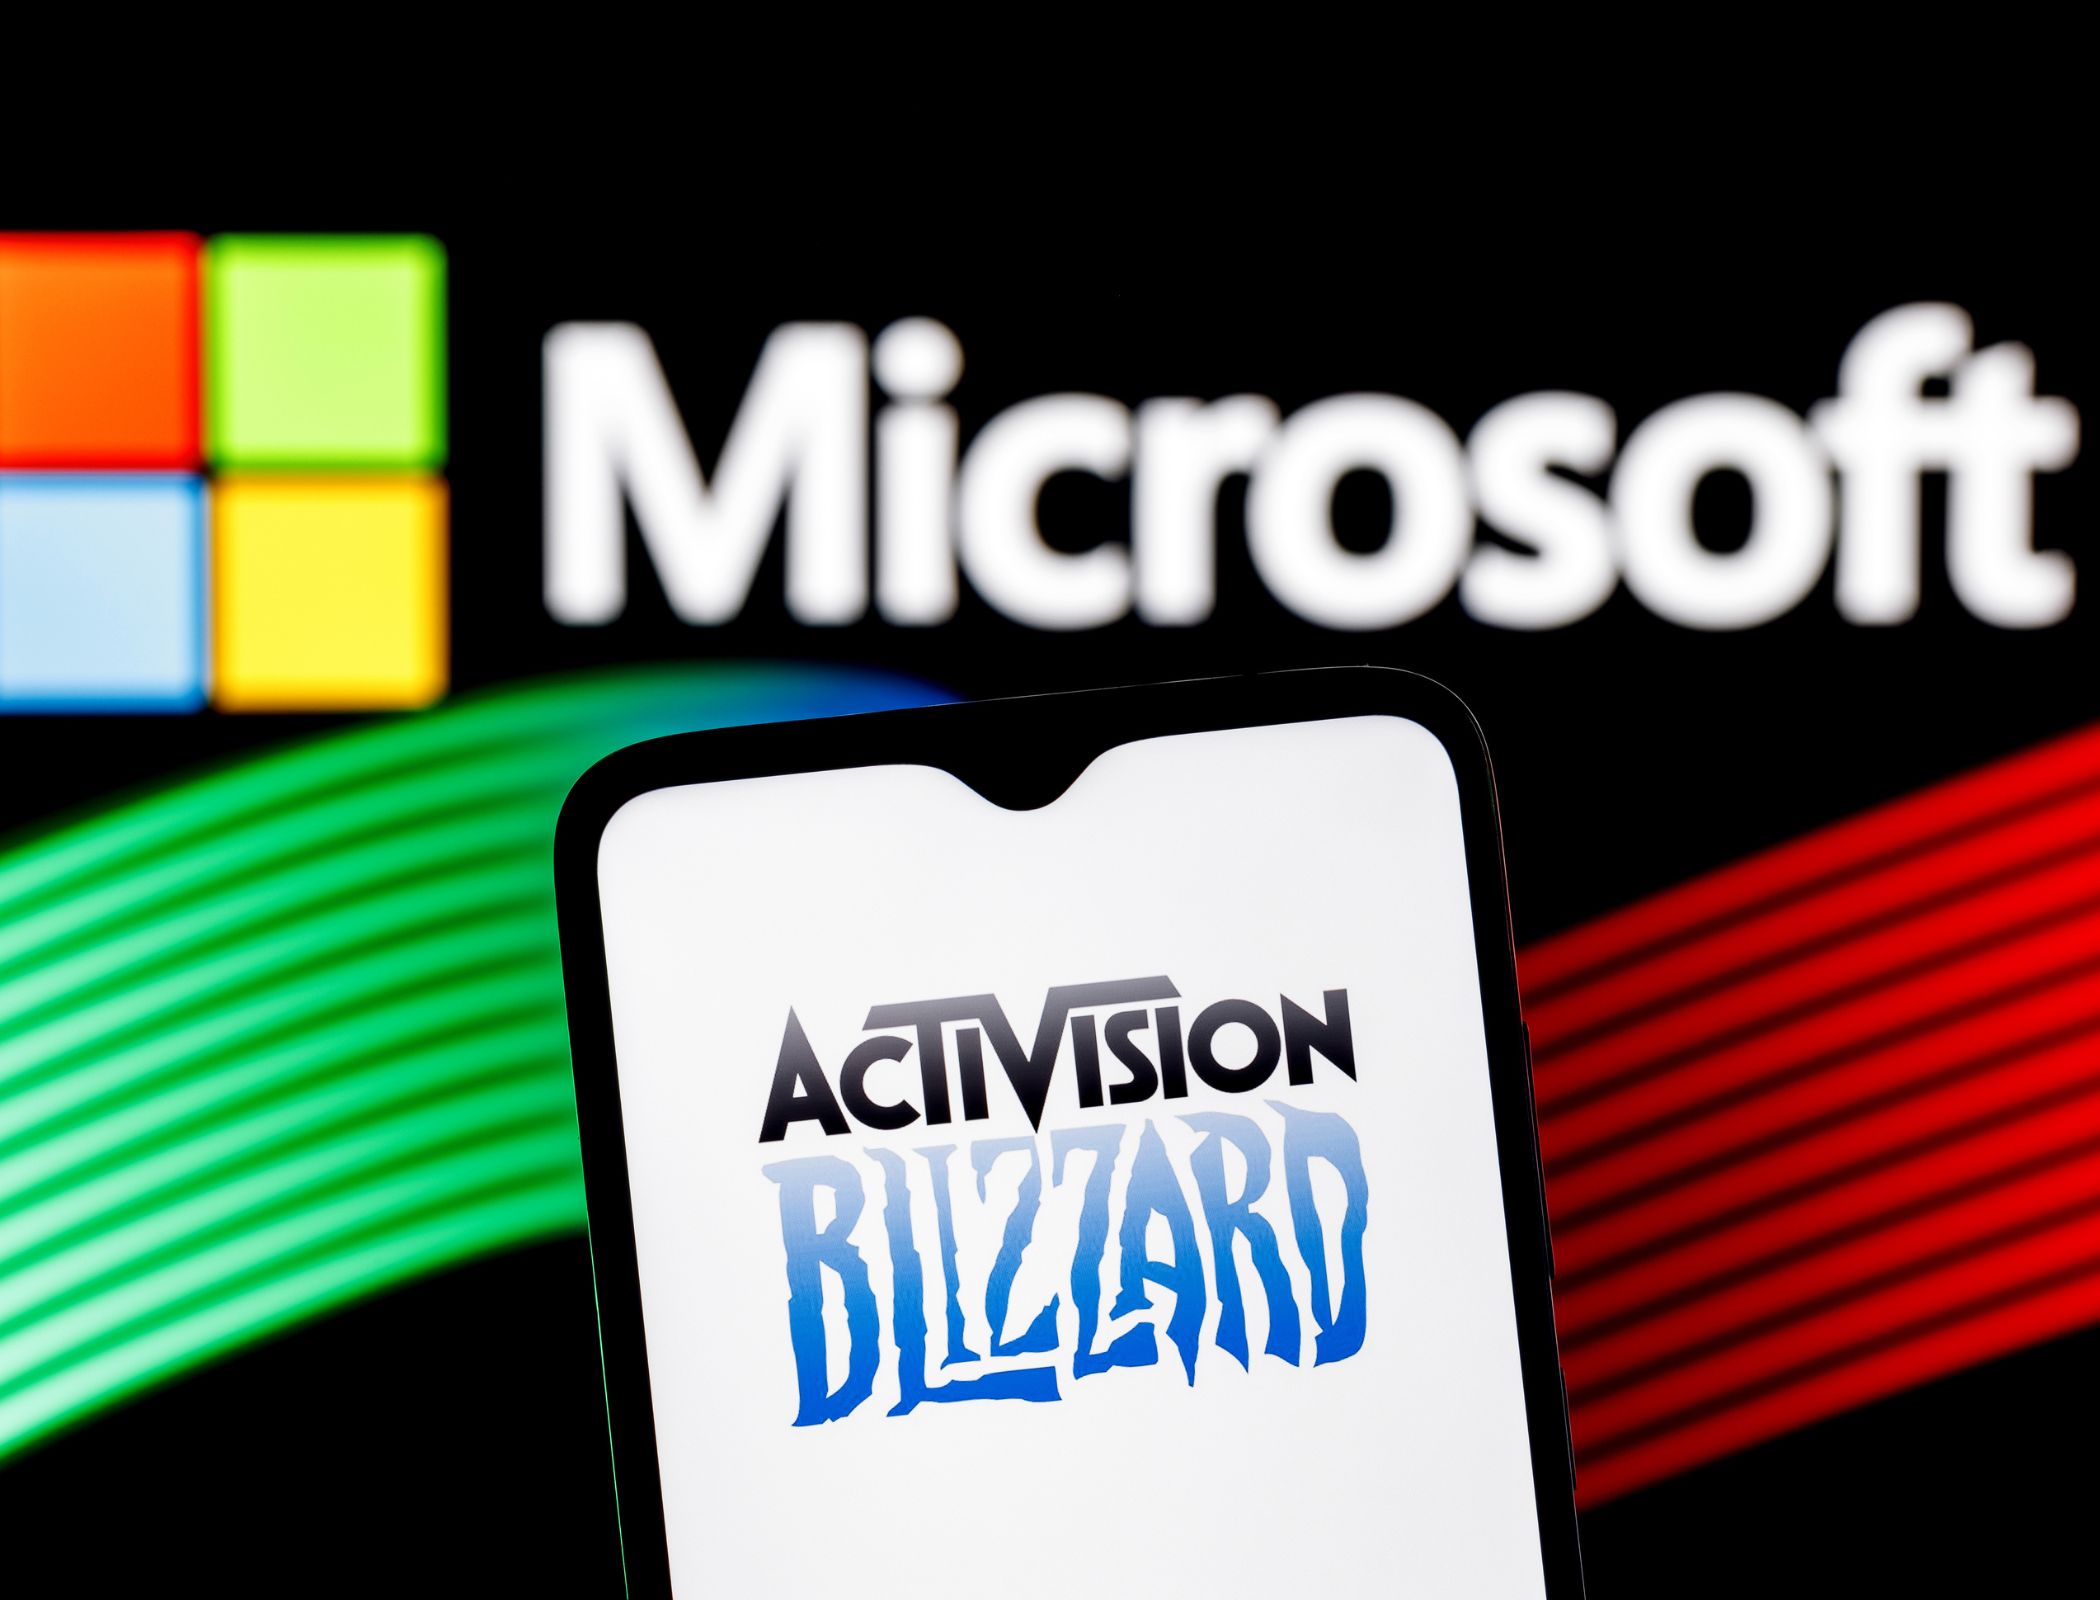 Microsoft's reworked Activision deal gets preliminary UK approval